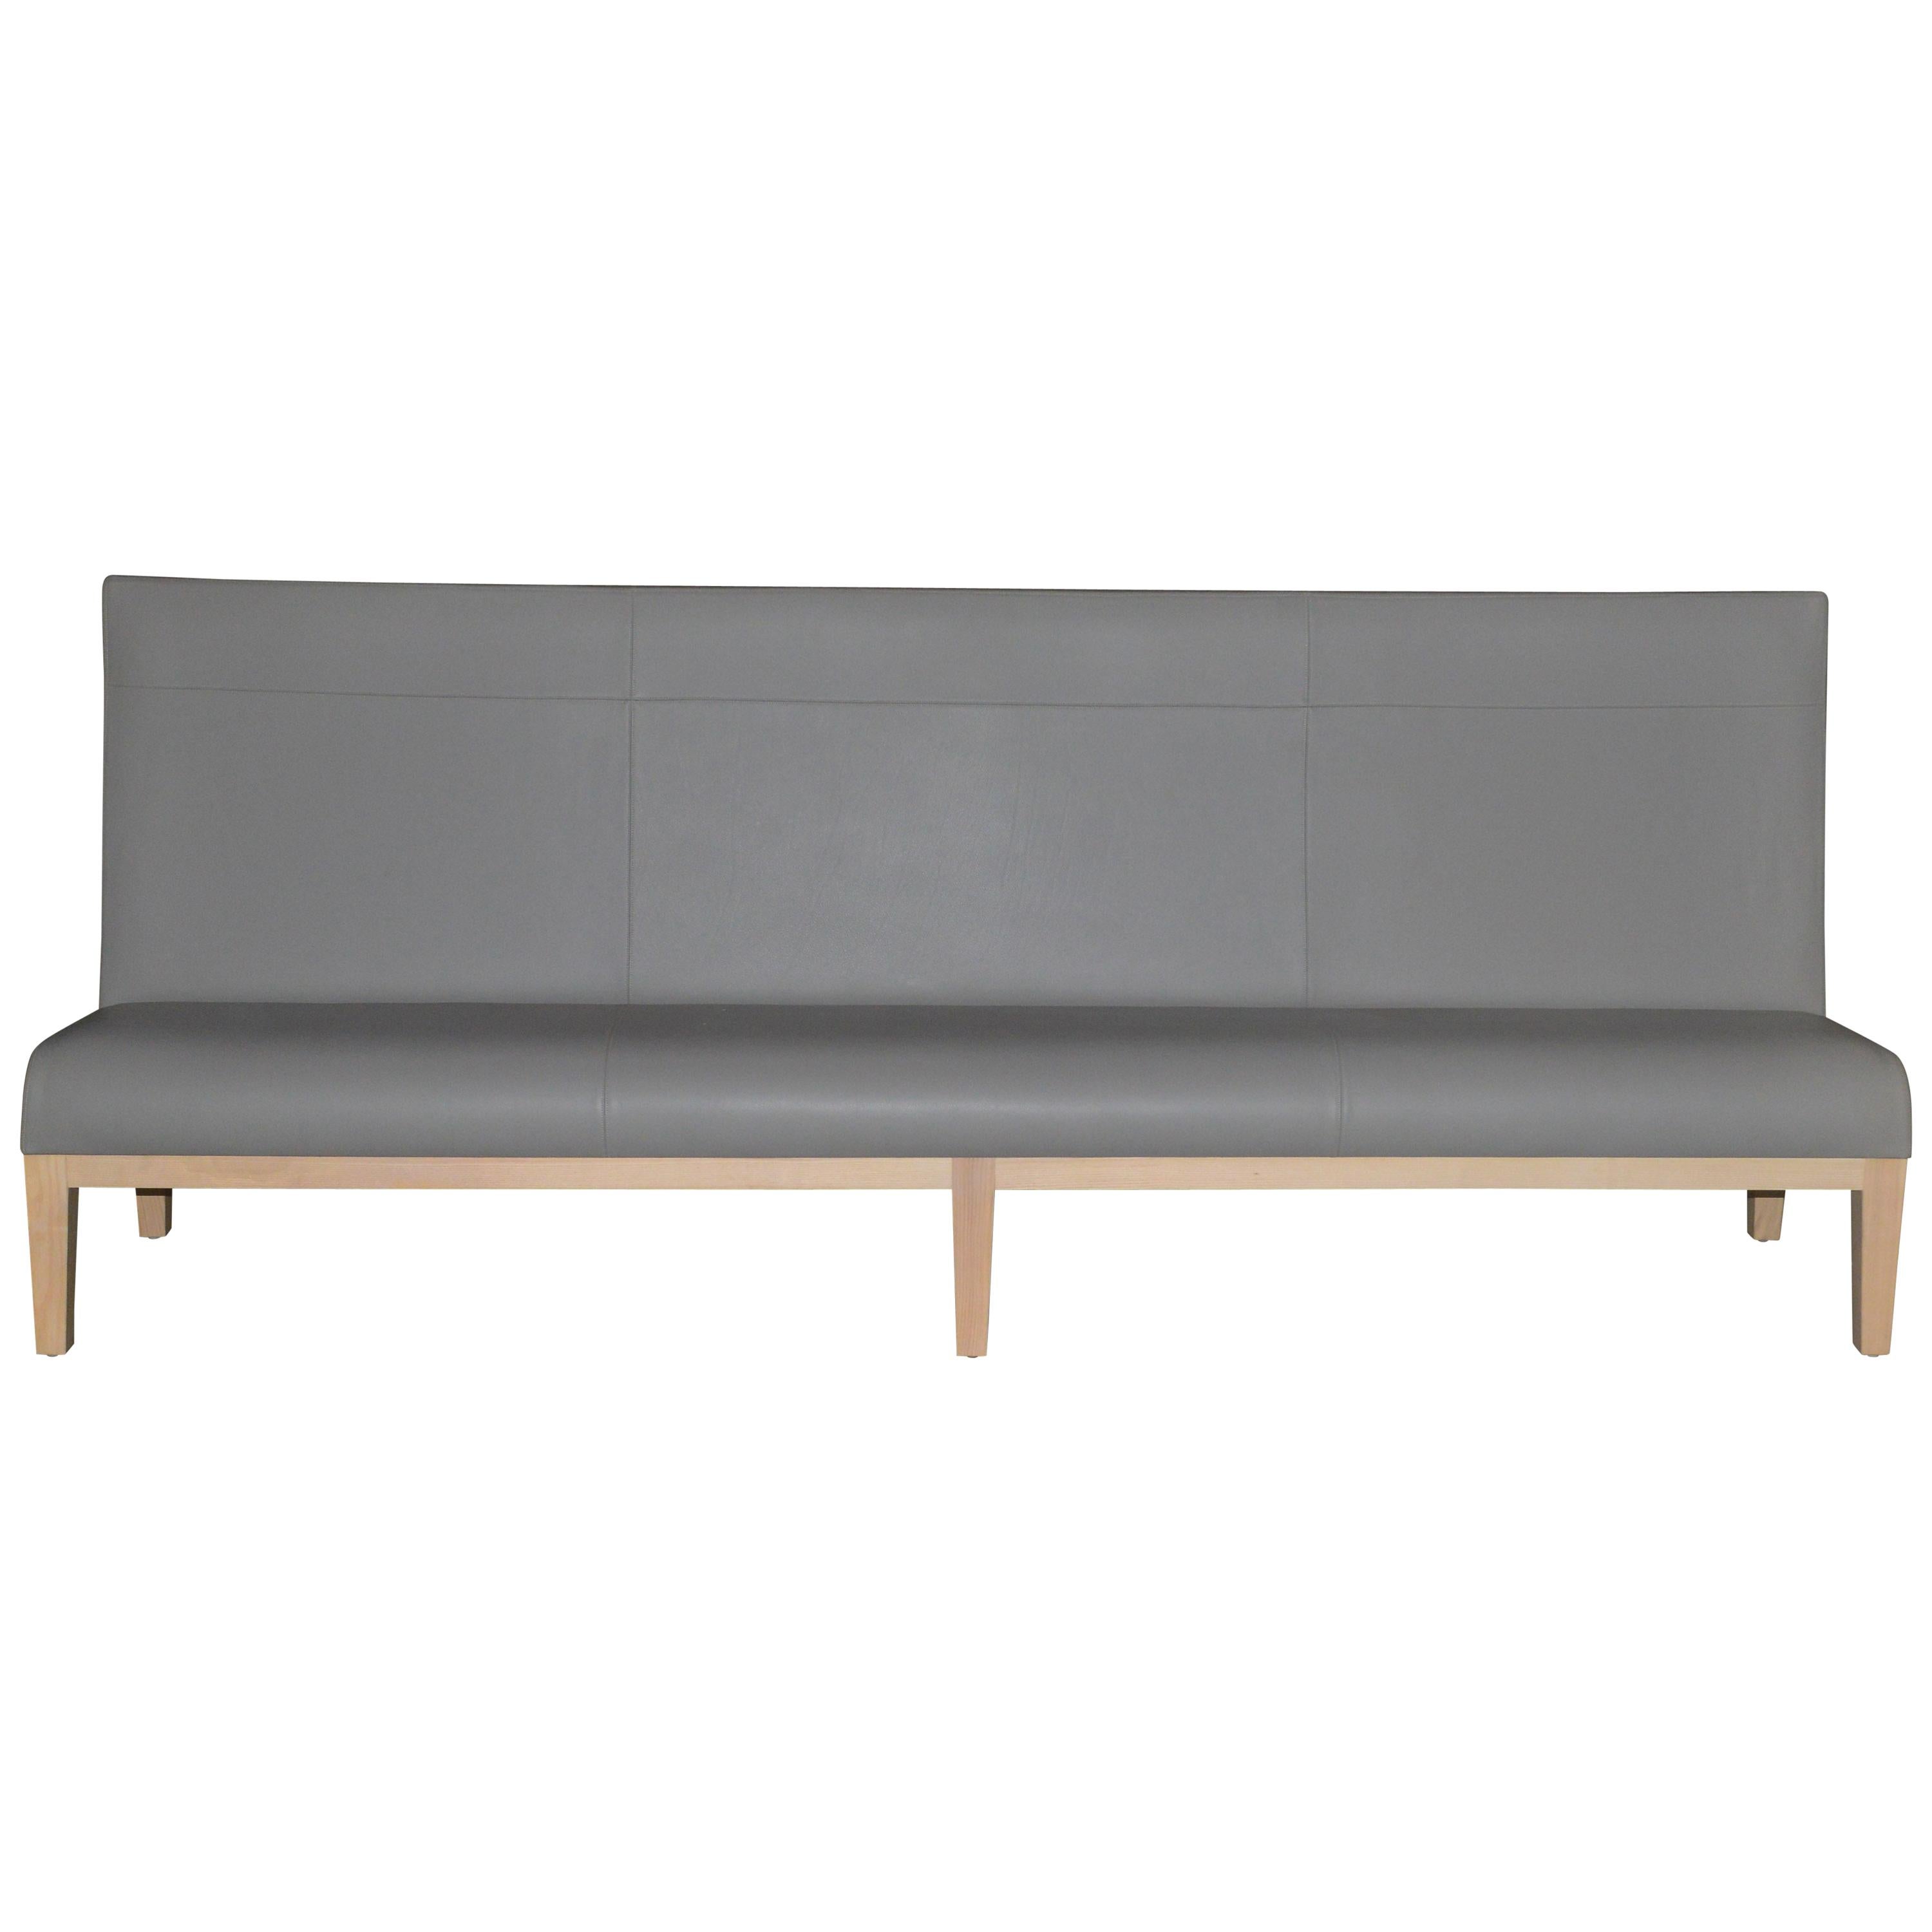 Liaigre Modern Leather, Leather Banquette Seating